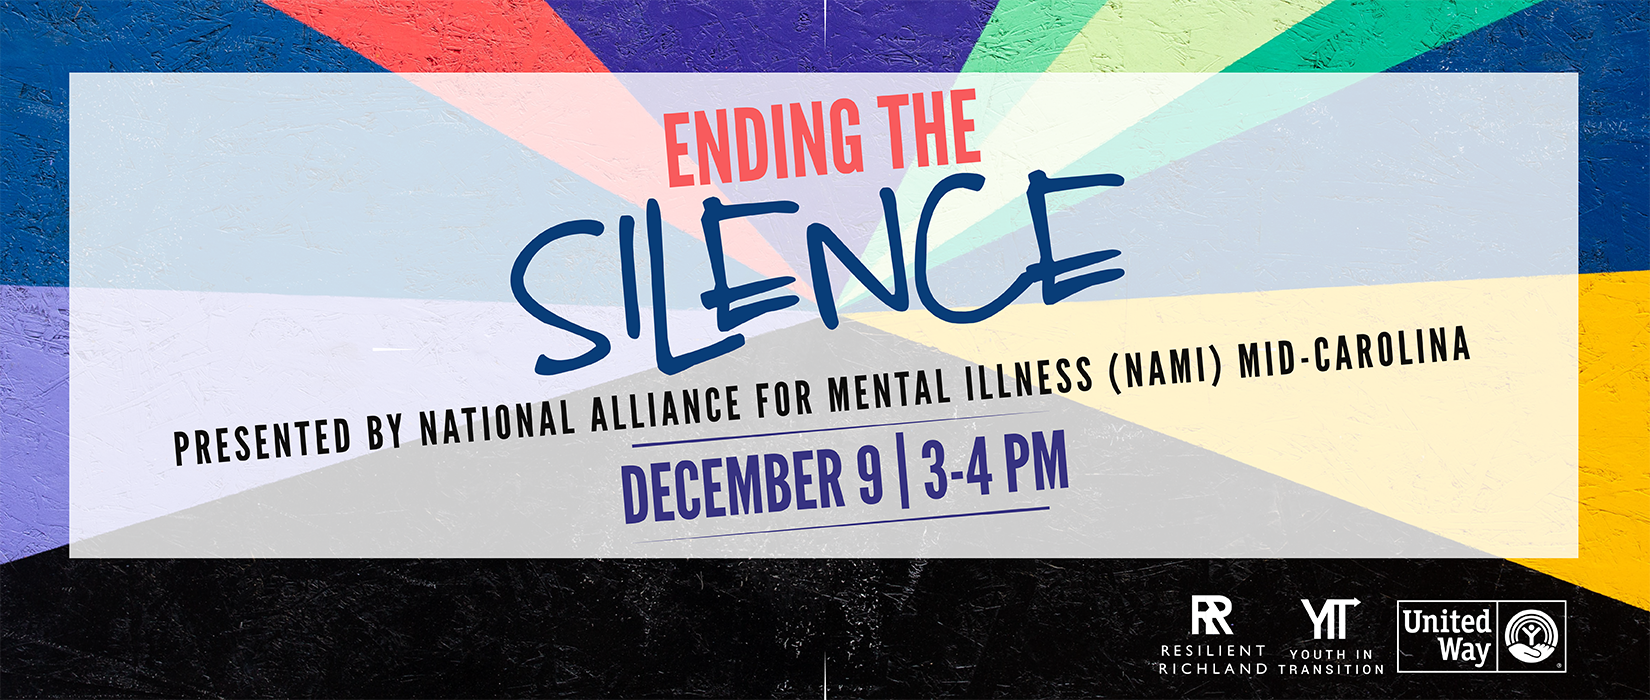 Sign up for Ending the Silence” training led by the National Alliance on Mental Illness on Dec. 9